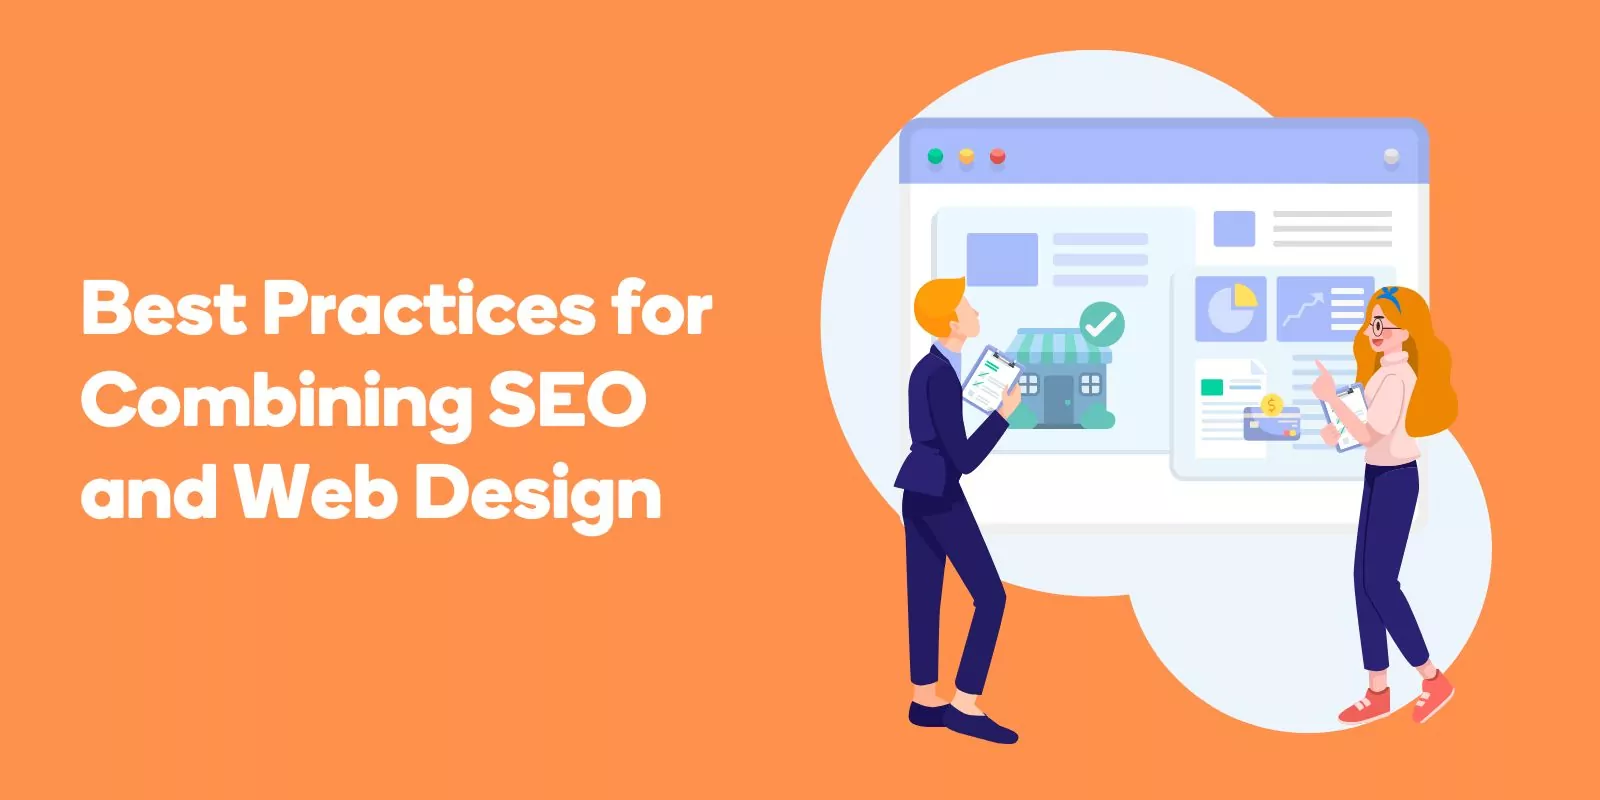 Best Practices for Combining SEO and Web Design